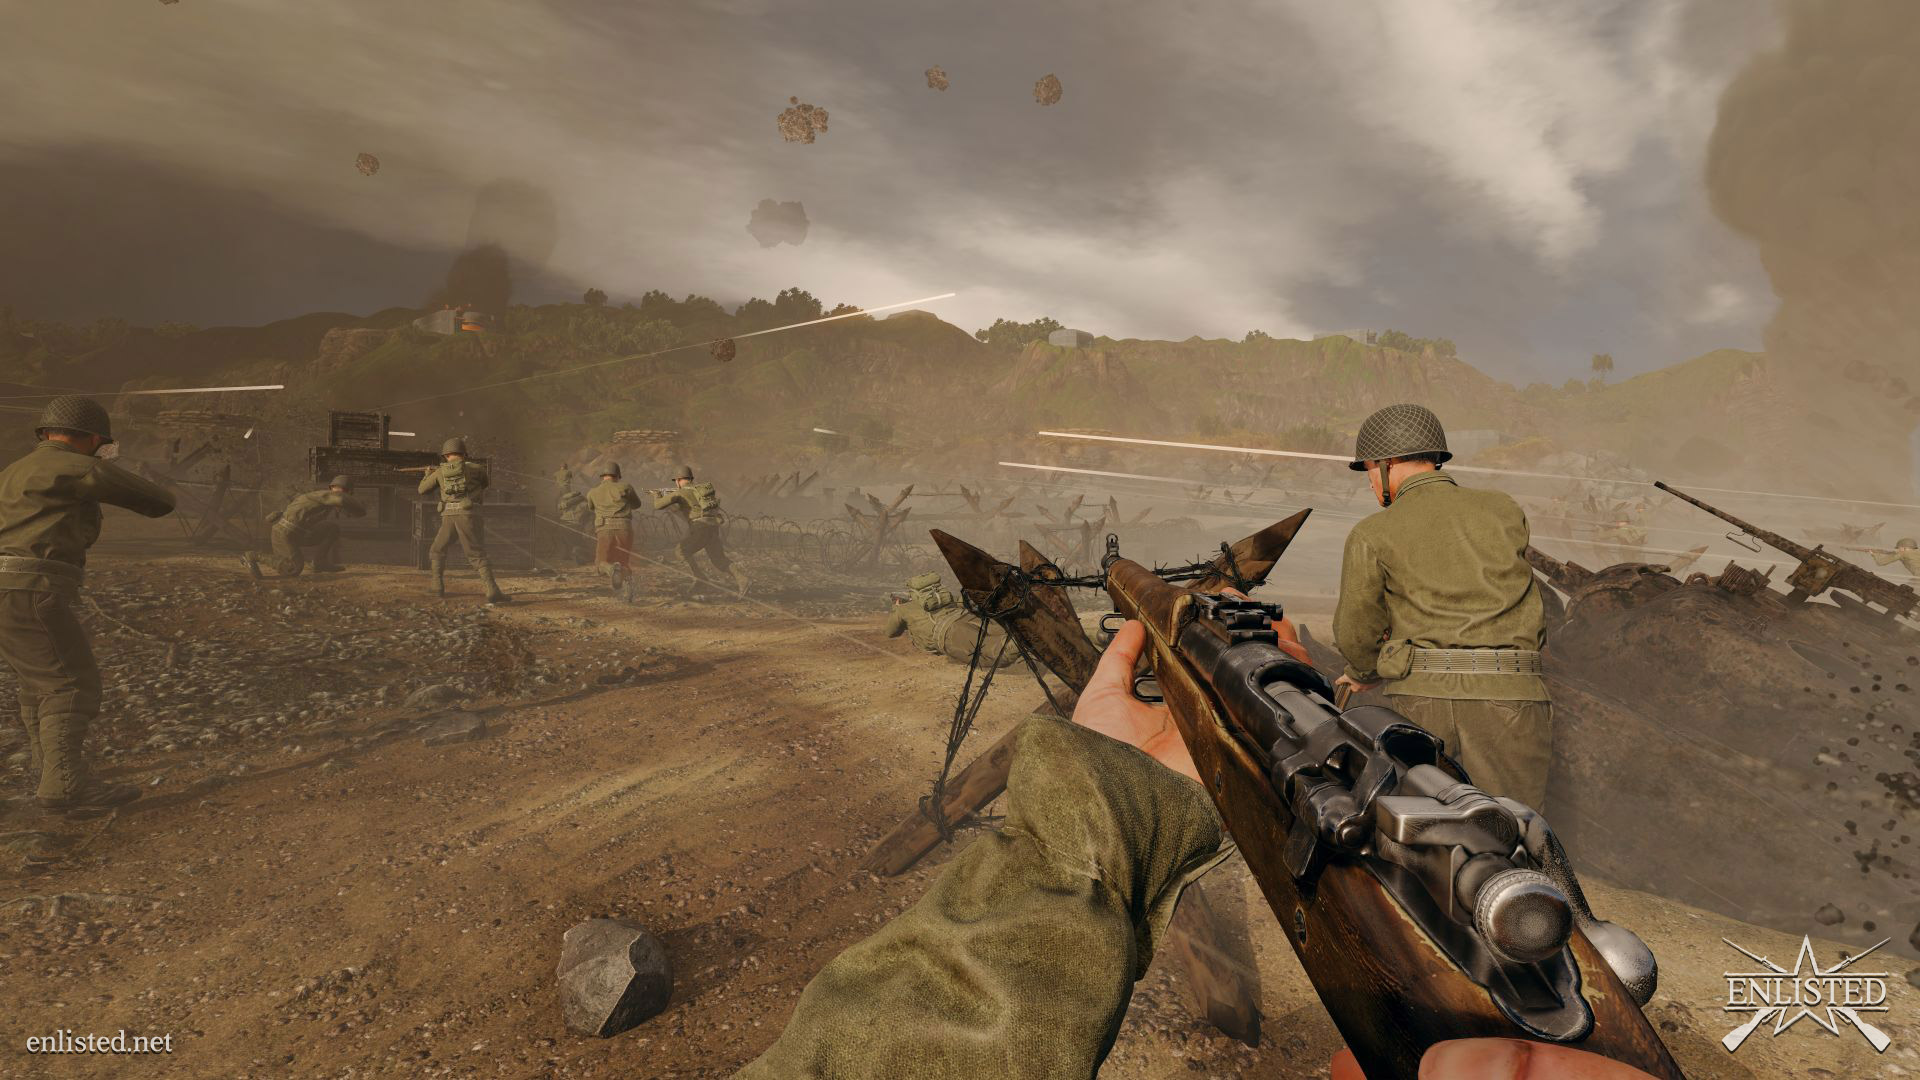 100-Player WWII FPS “Enlisted” Promises Realistic Battles, Not eSports Trash